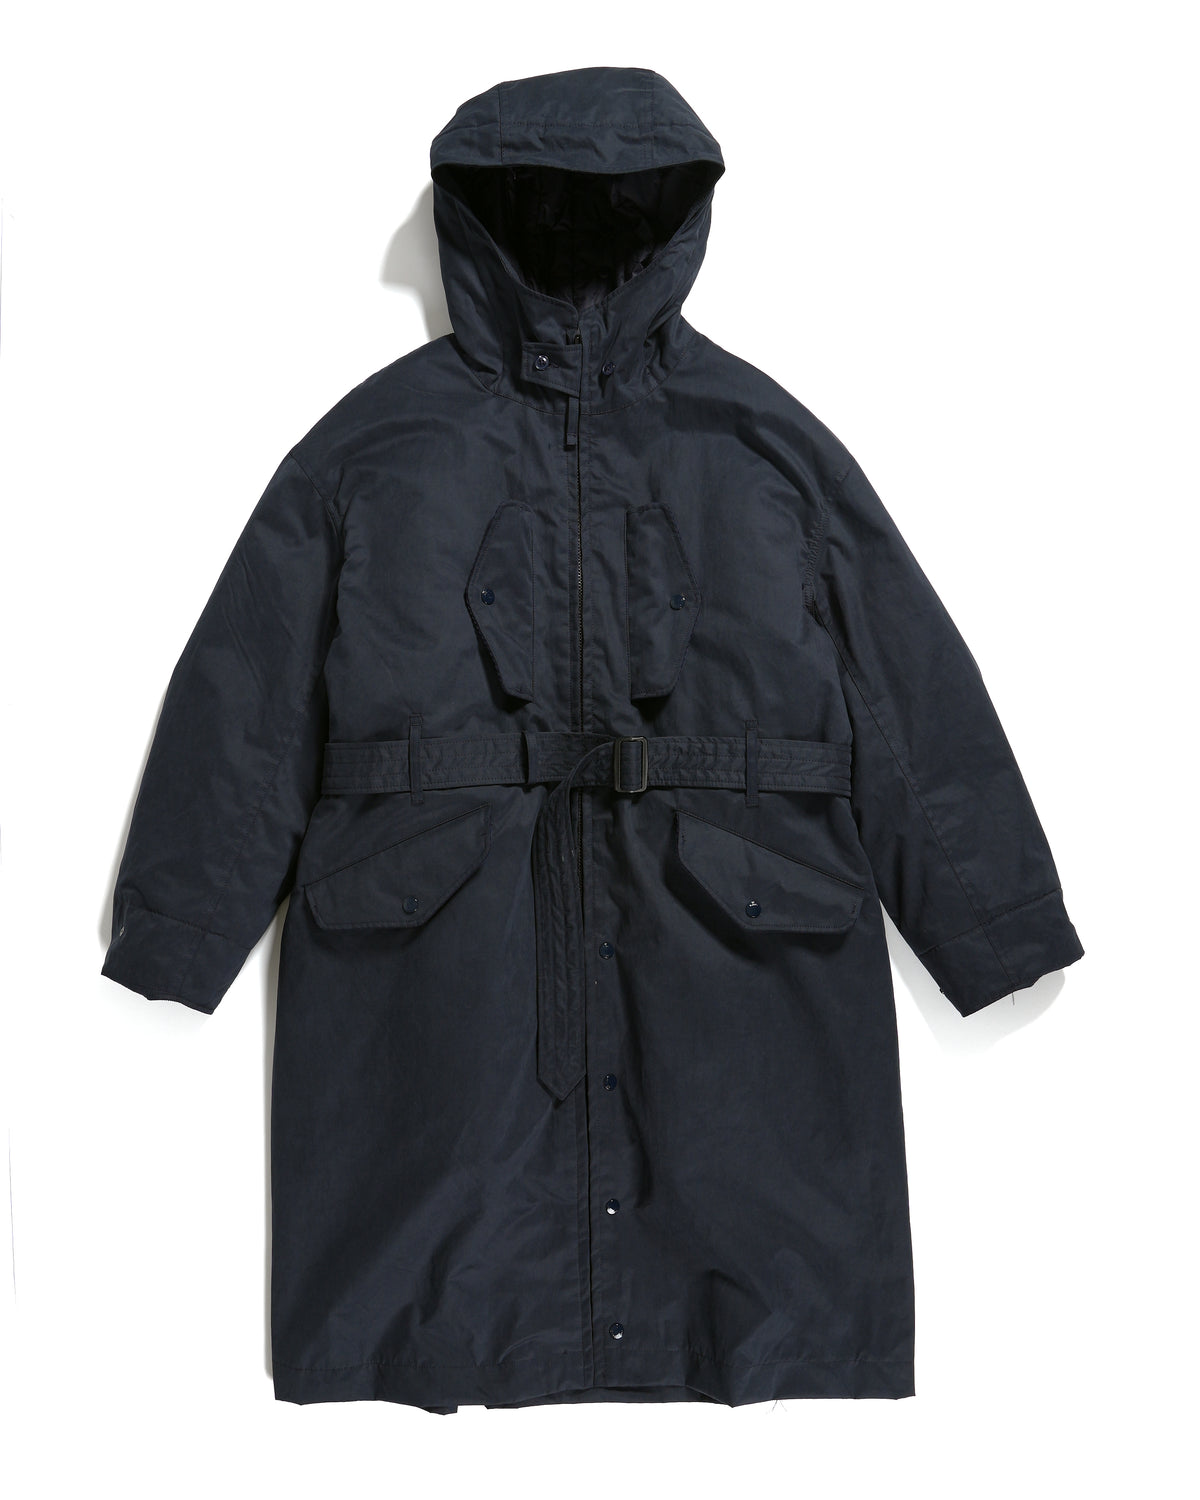 Storm Coat - Dk. Navy PC Coated Cloth | Nepenthes New York